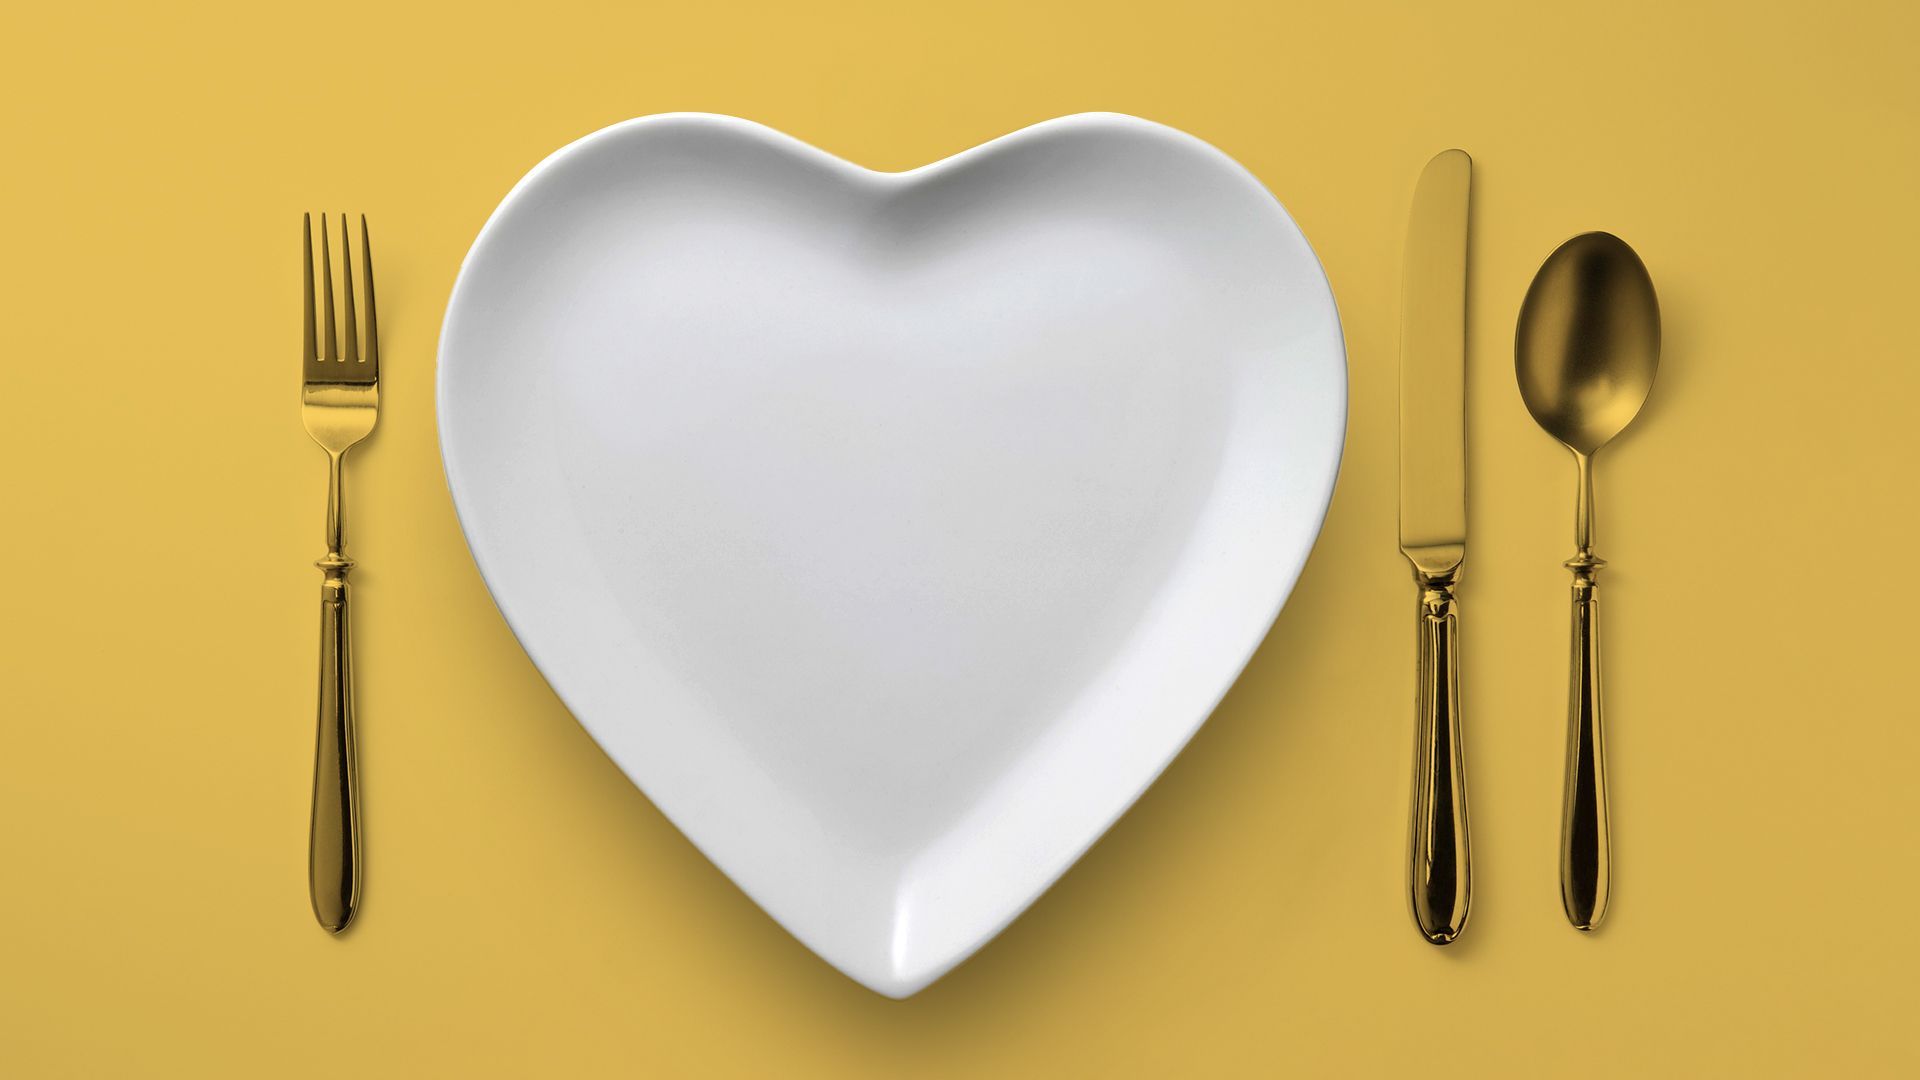 Illustration of a place setting with a heart-shaped plate